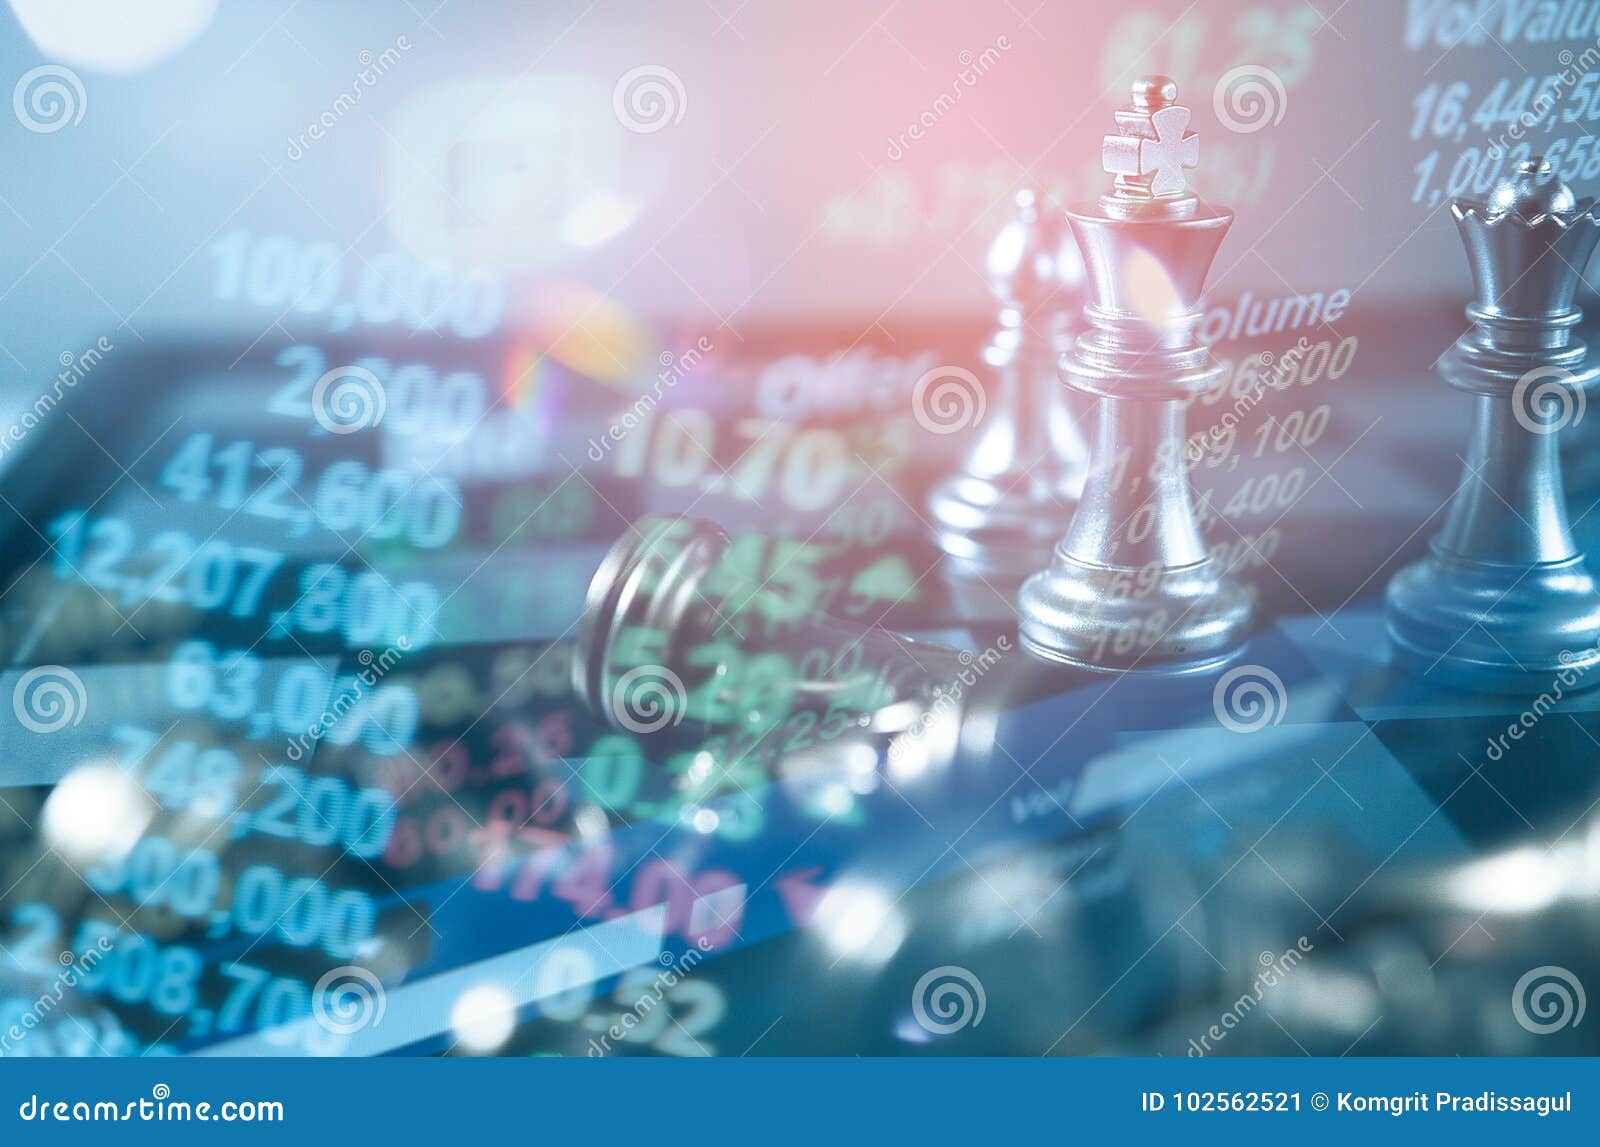 200+] Chess Backgrounds